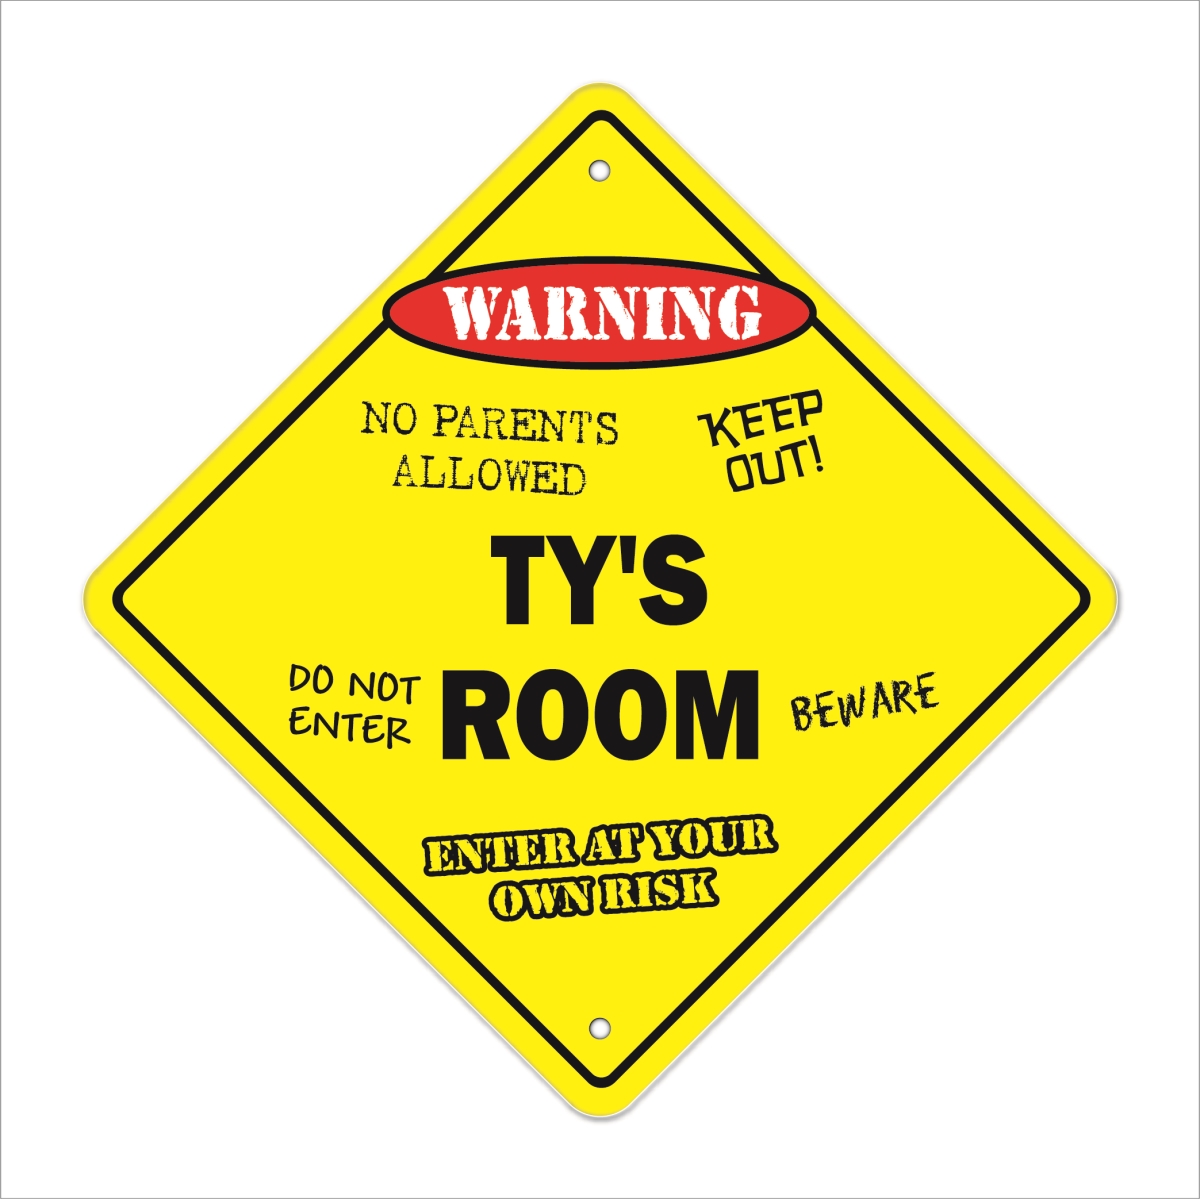 SignMission X-Tys Room 12 x 12 in. Crossing Zone Xing Room Sign - Tys